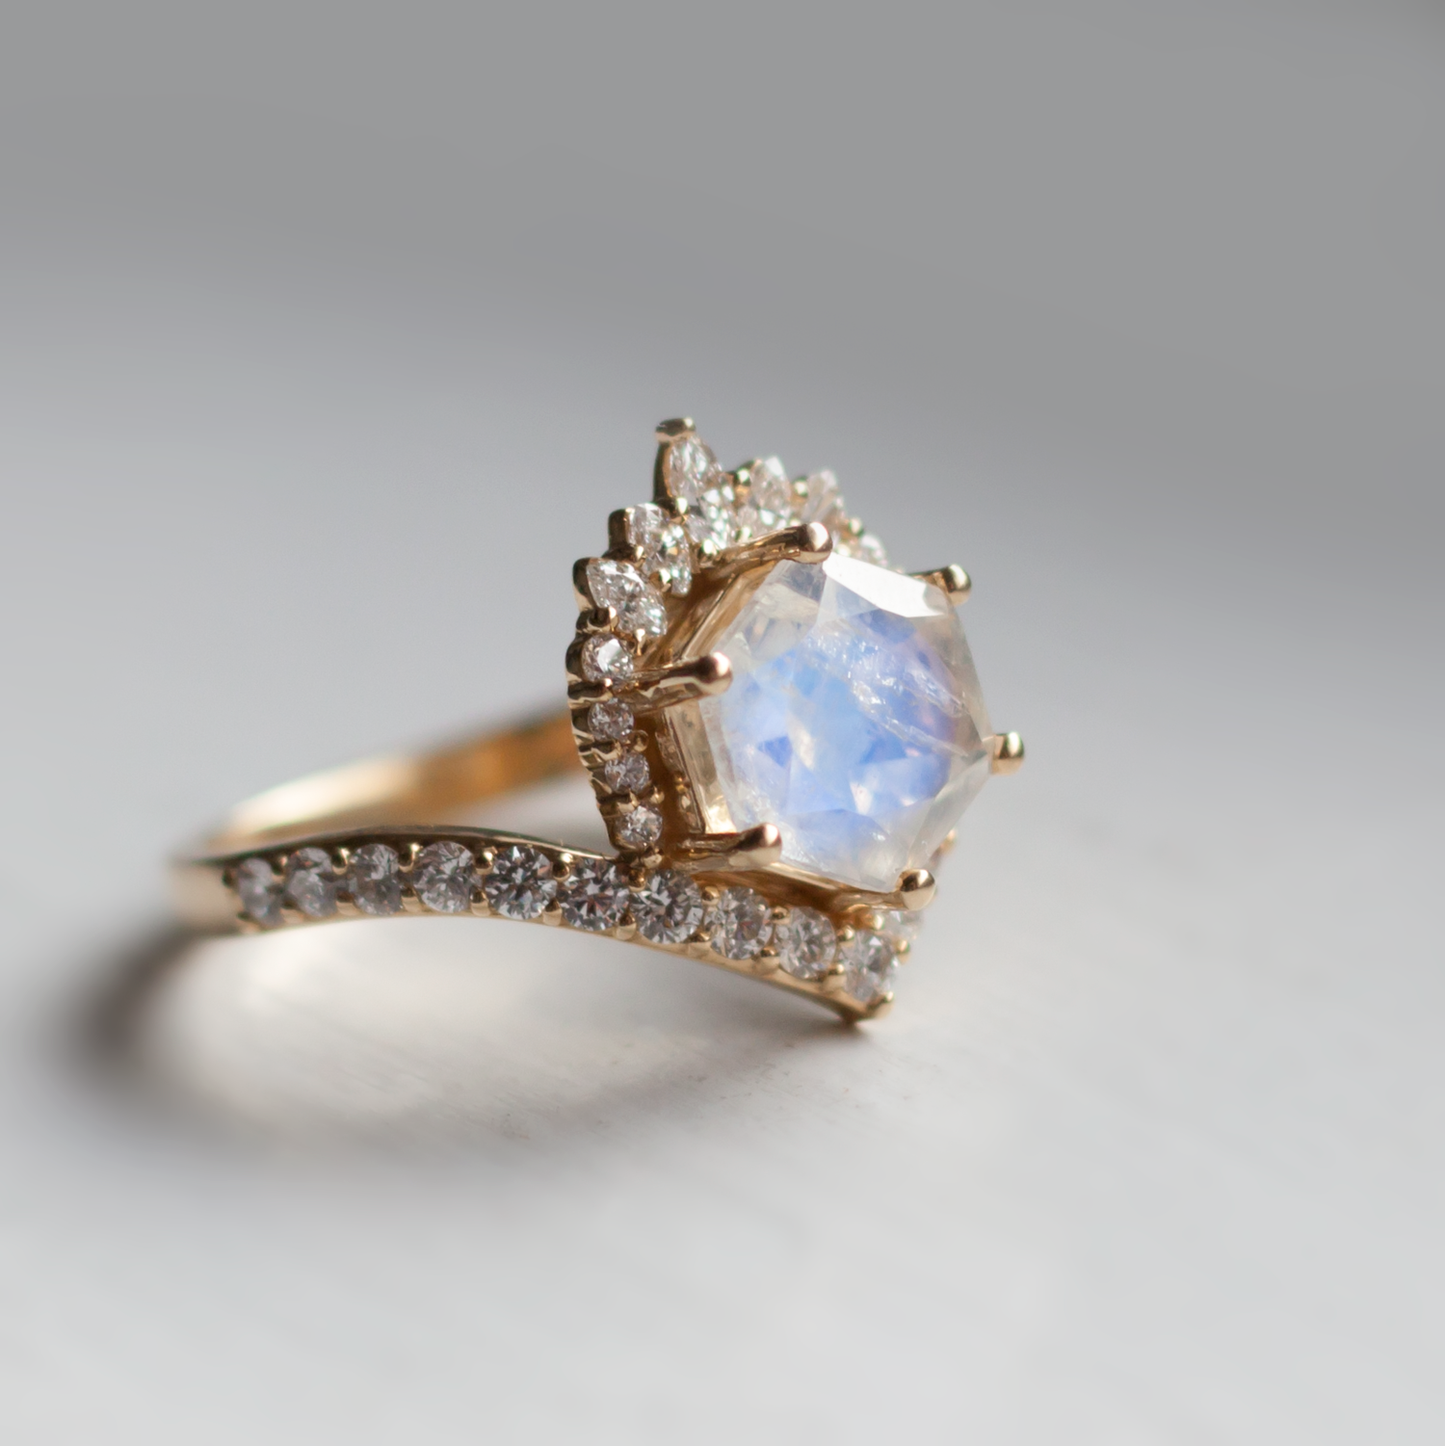 Side view of the moonstone devoir ring on a grey background.